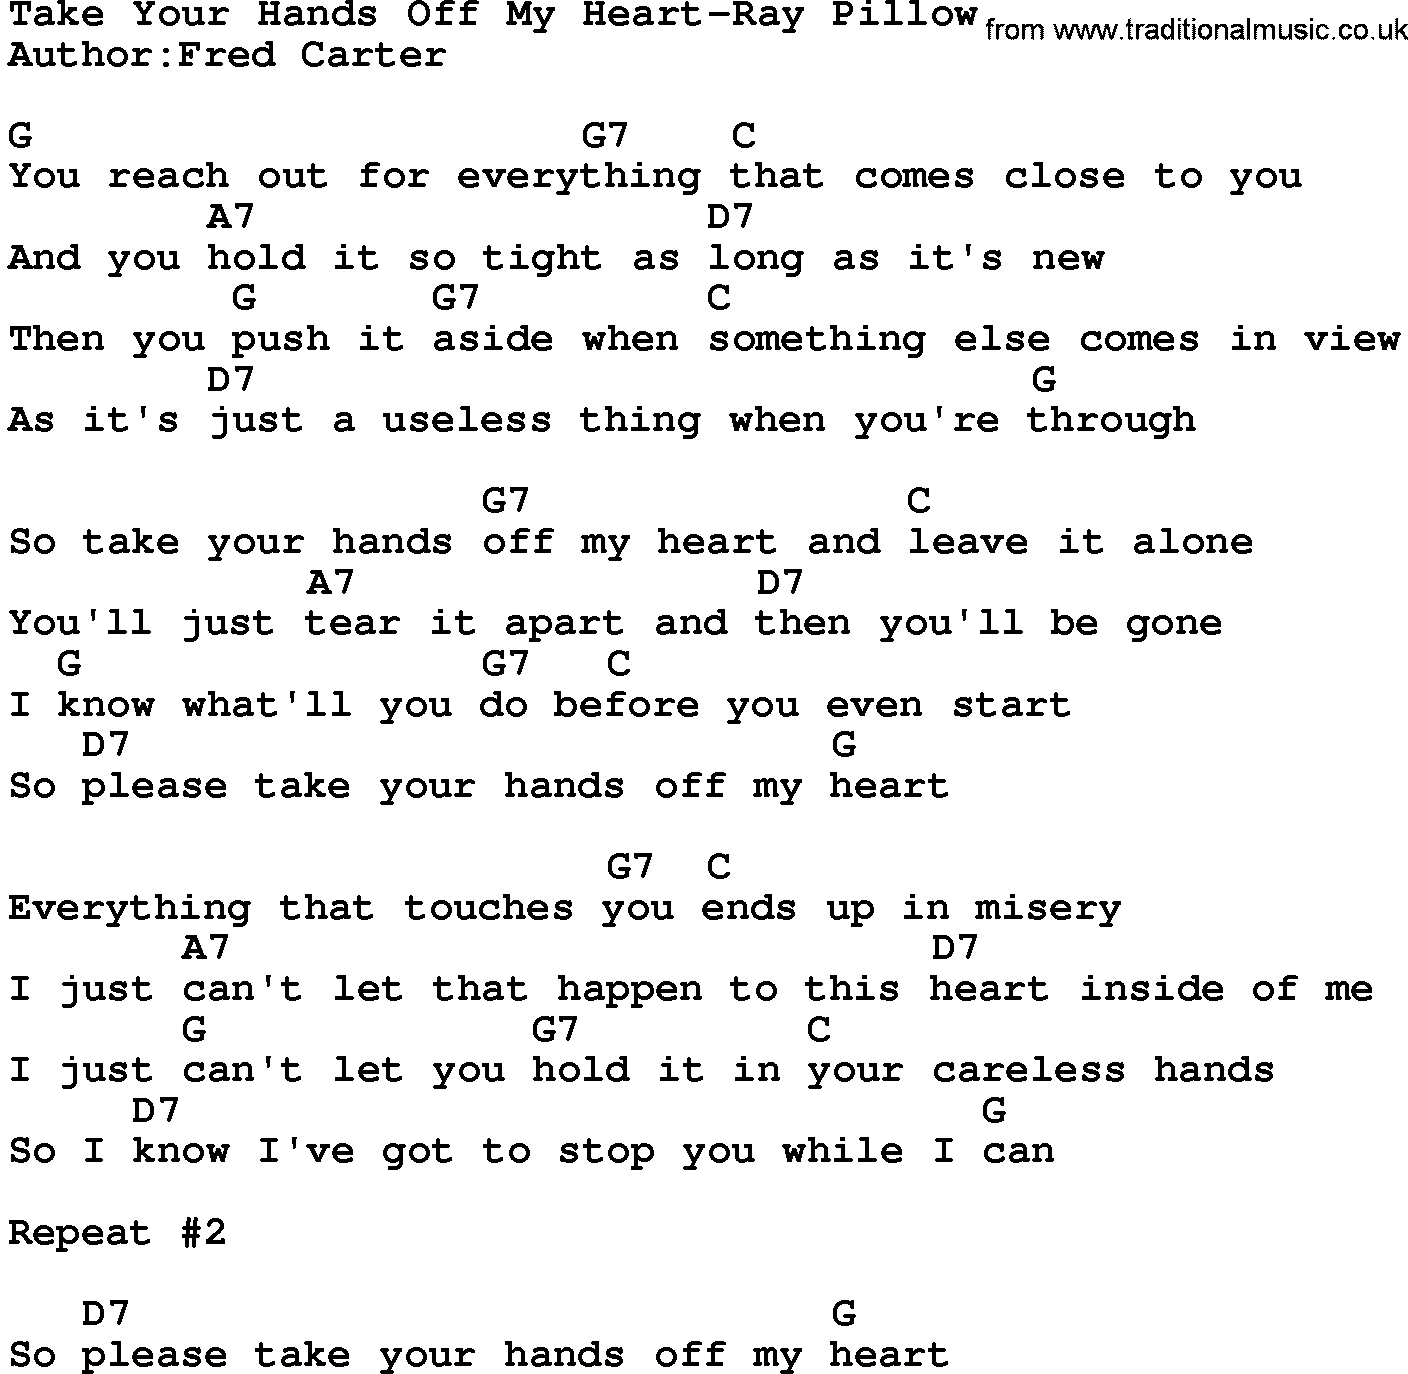 Country music song: Take Your Hands Off My Heart-Ray Pillow lyrics and chords